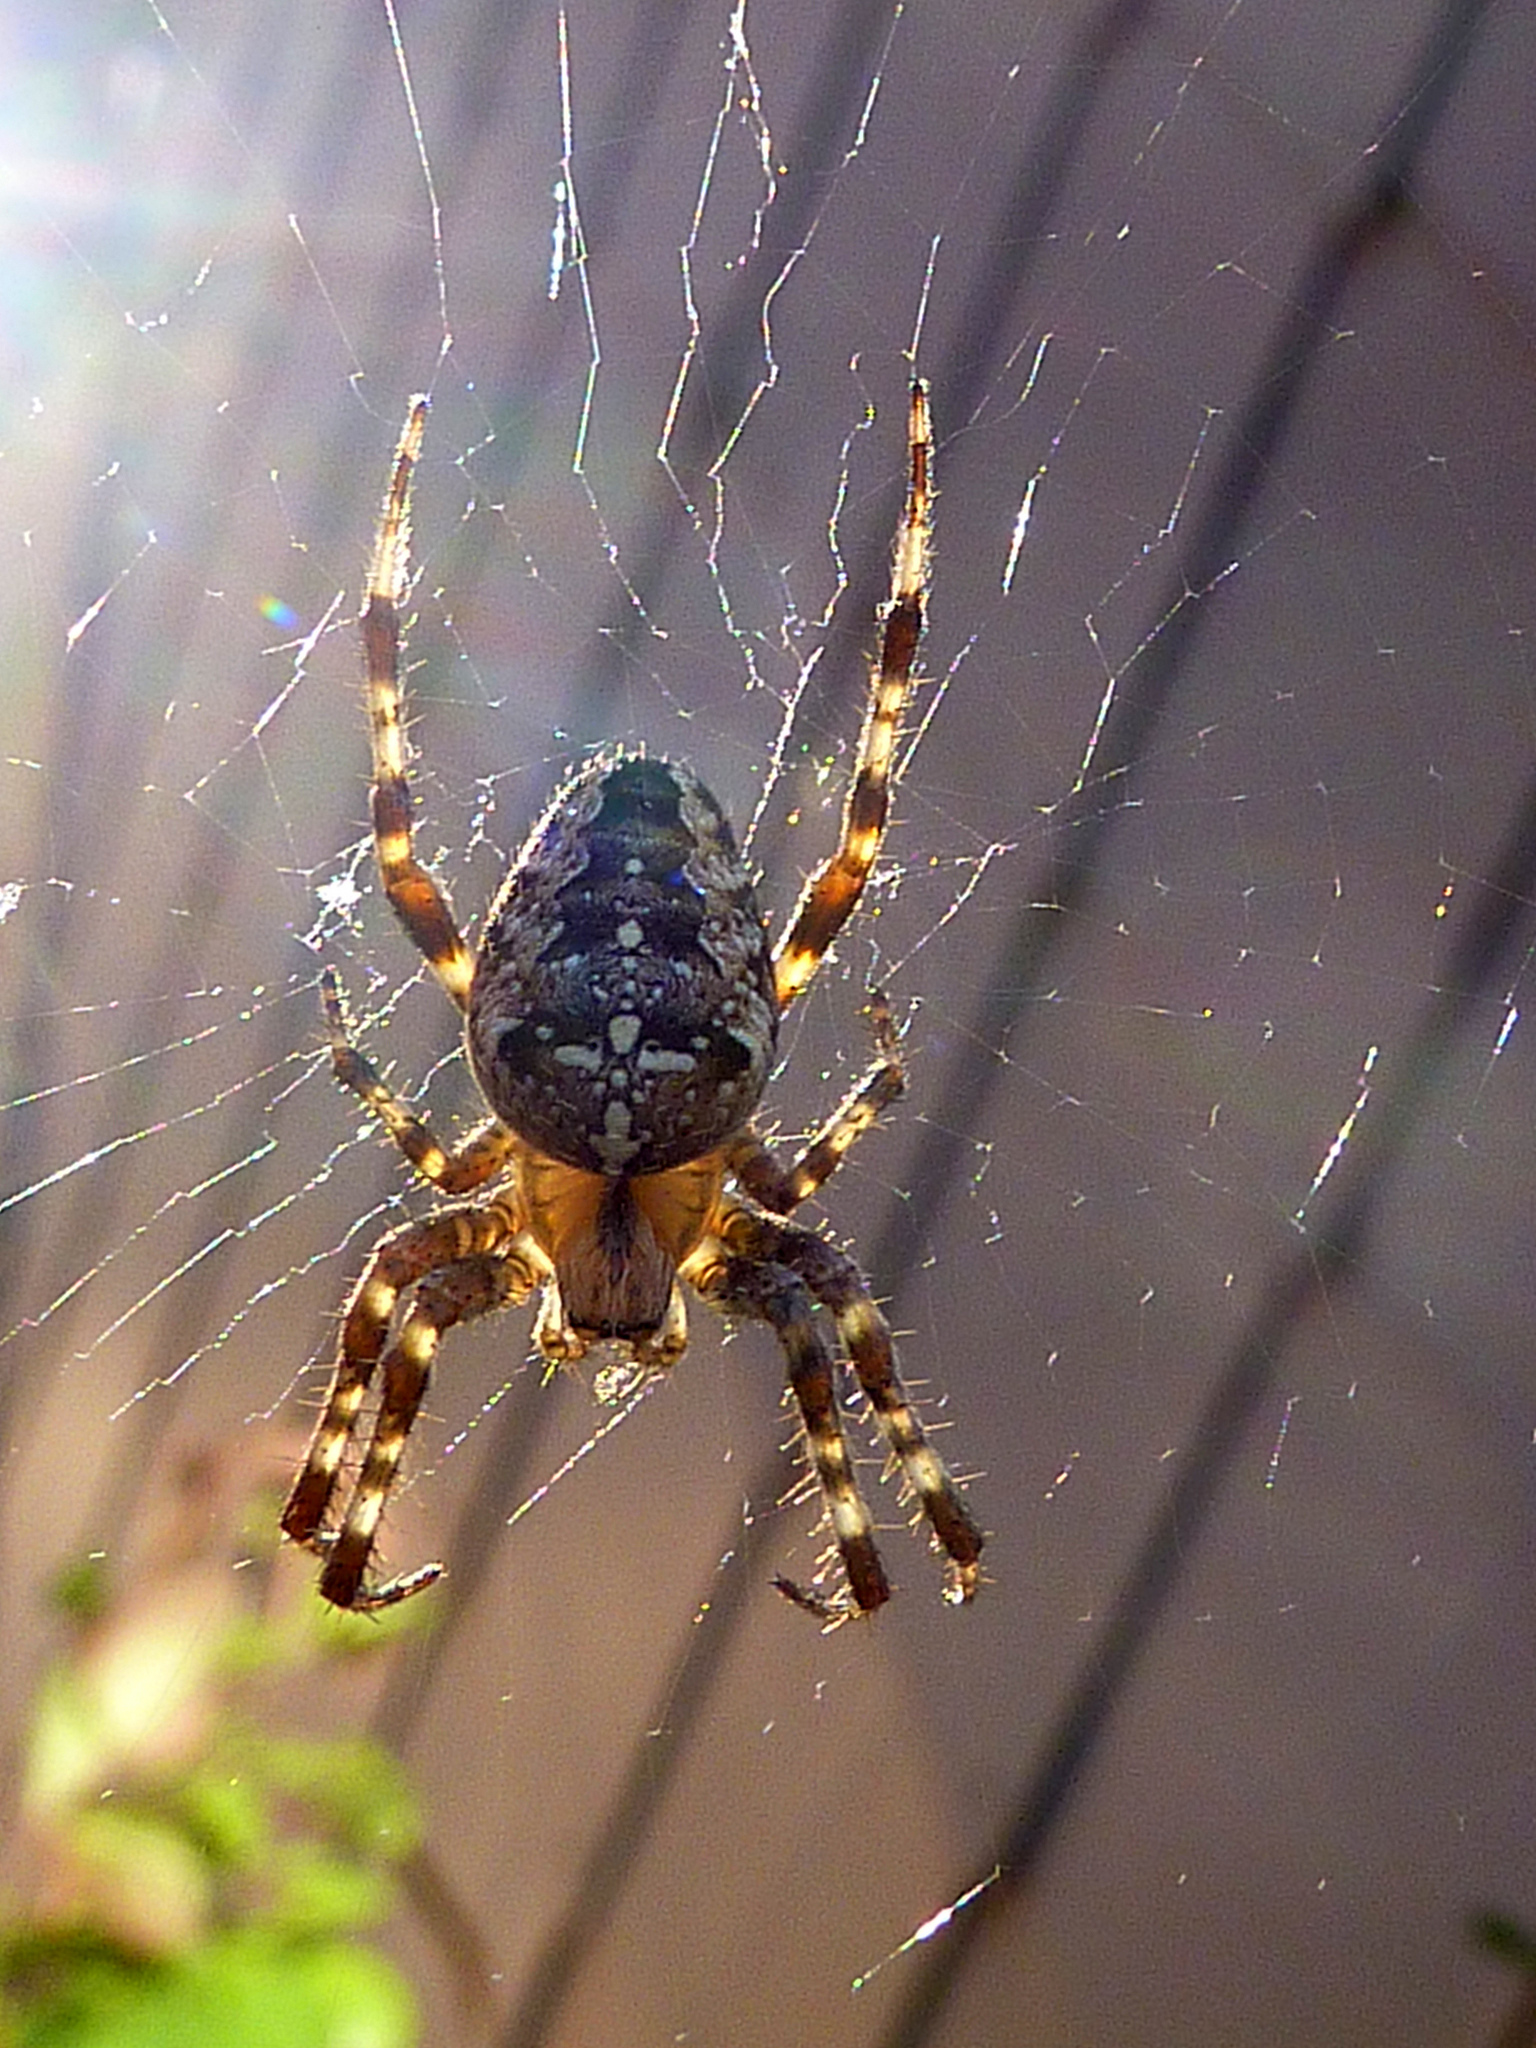 Afraid of Spiders? Here’s How to Get Rid of That